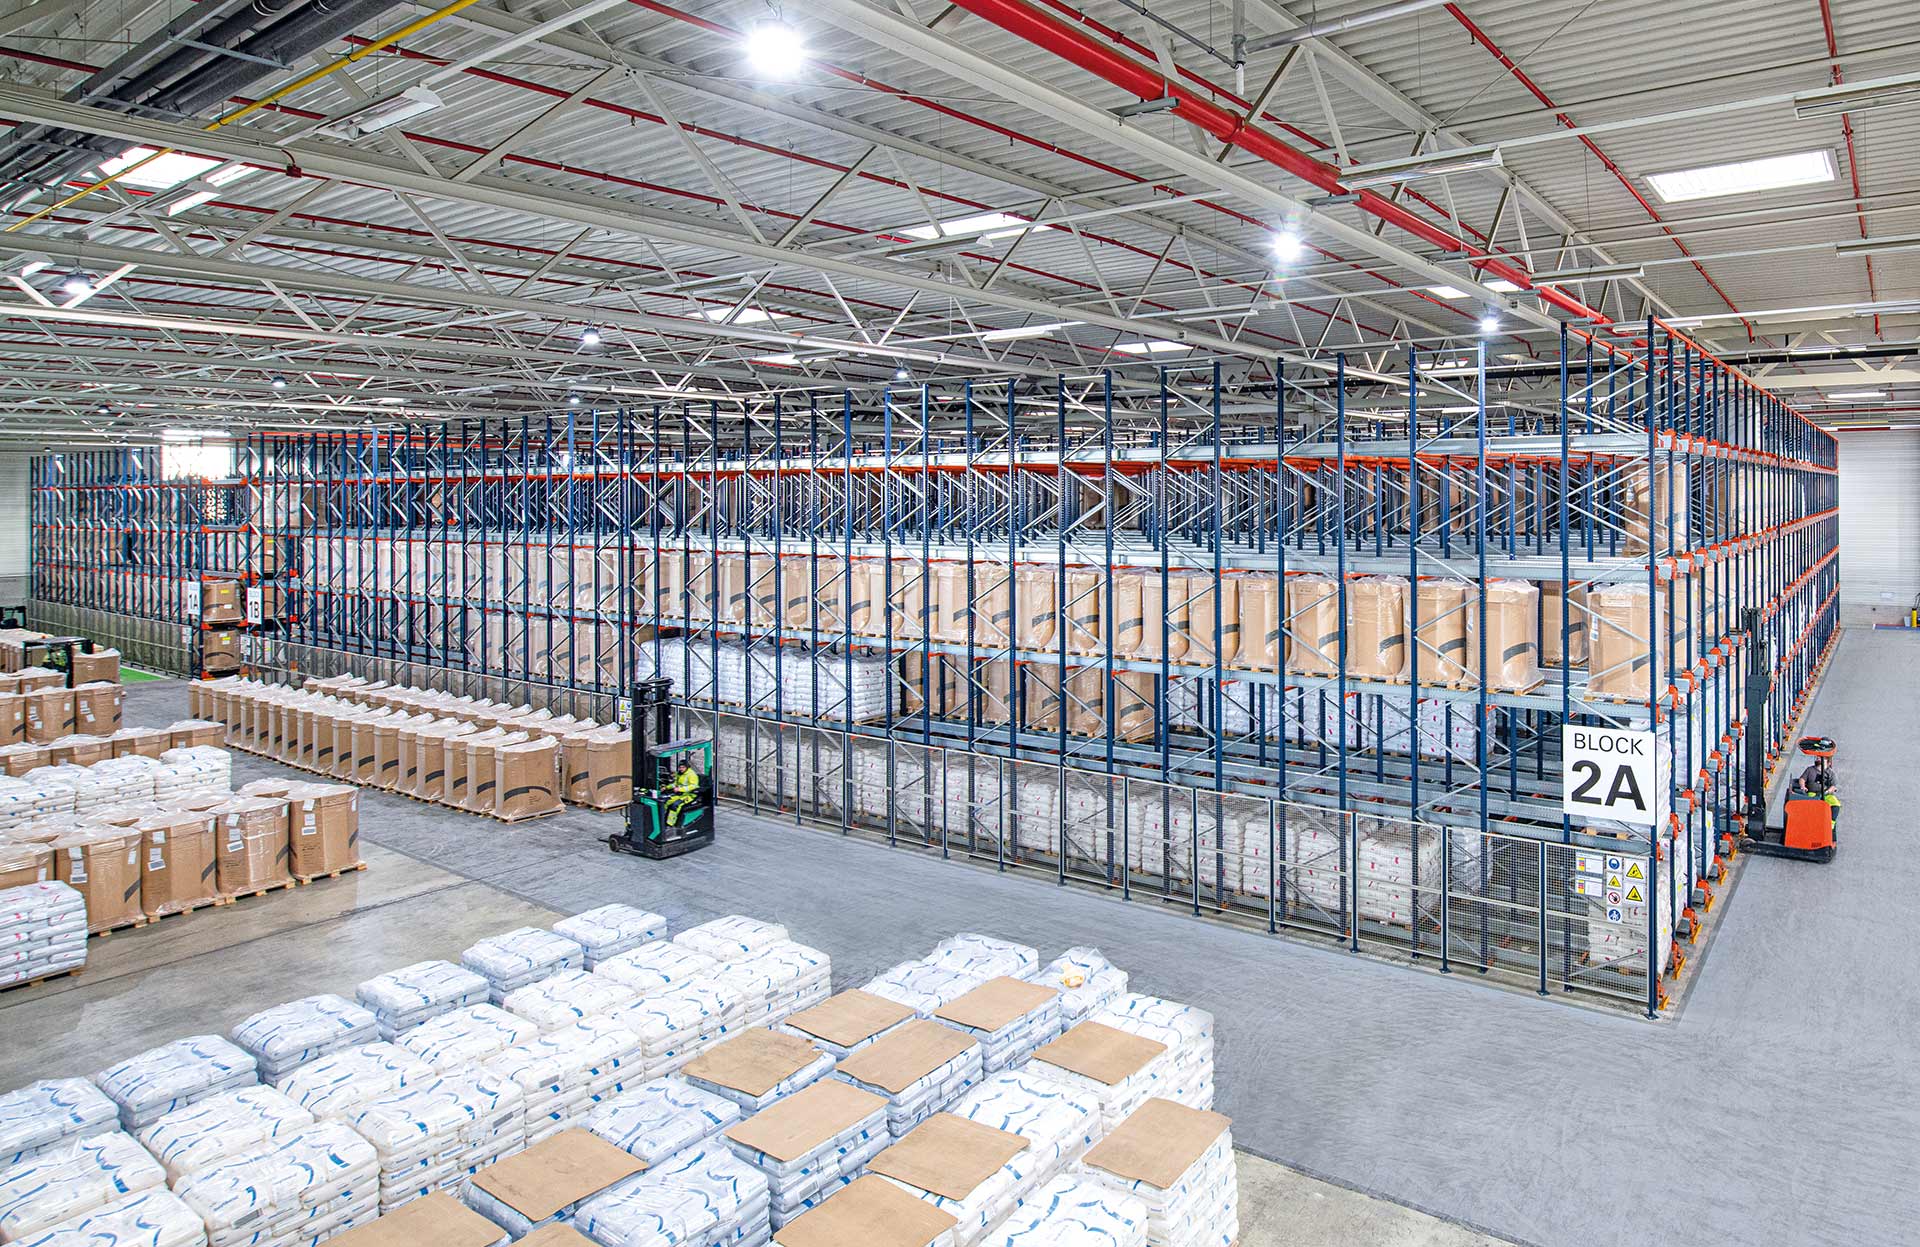 The Pallet Shuttle is a high-density storage system that maximises the available surface area